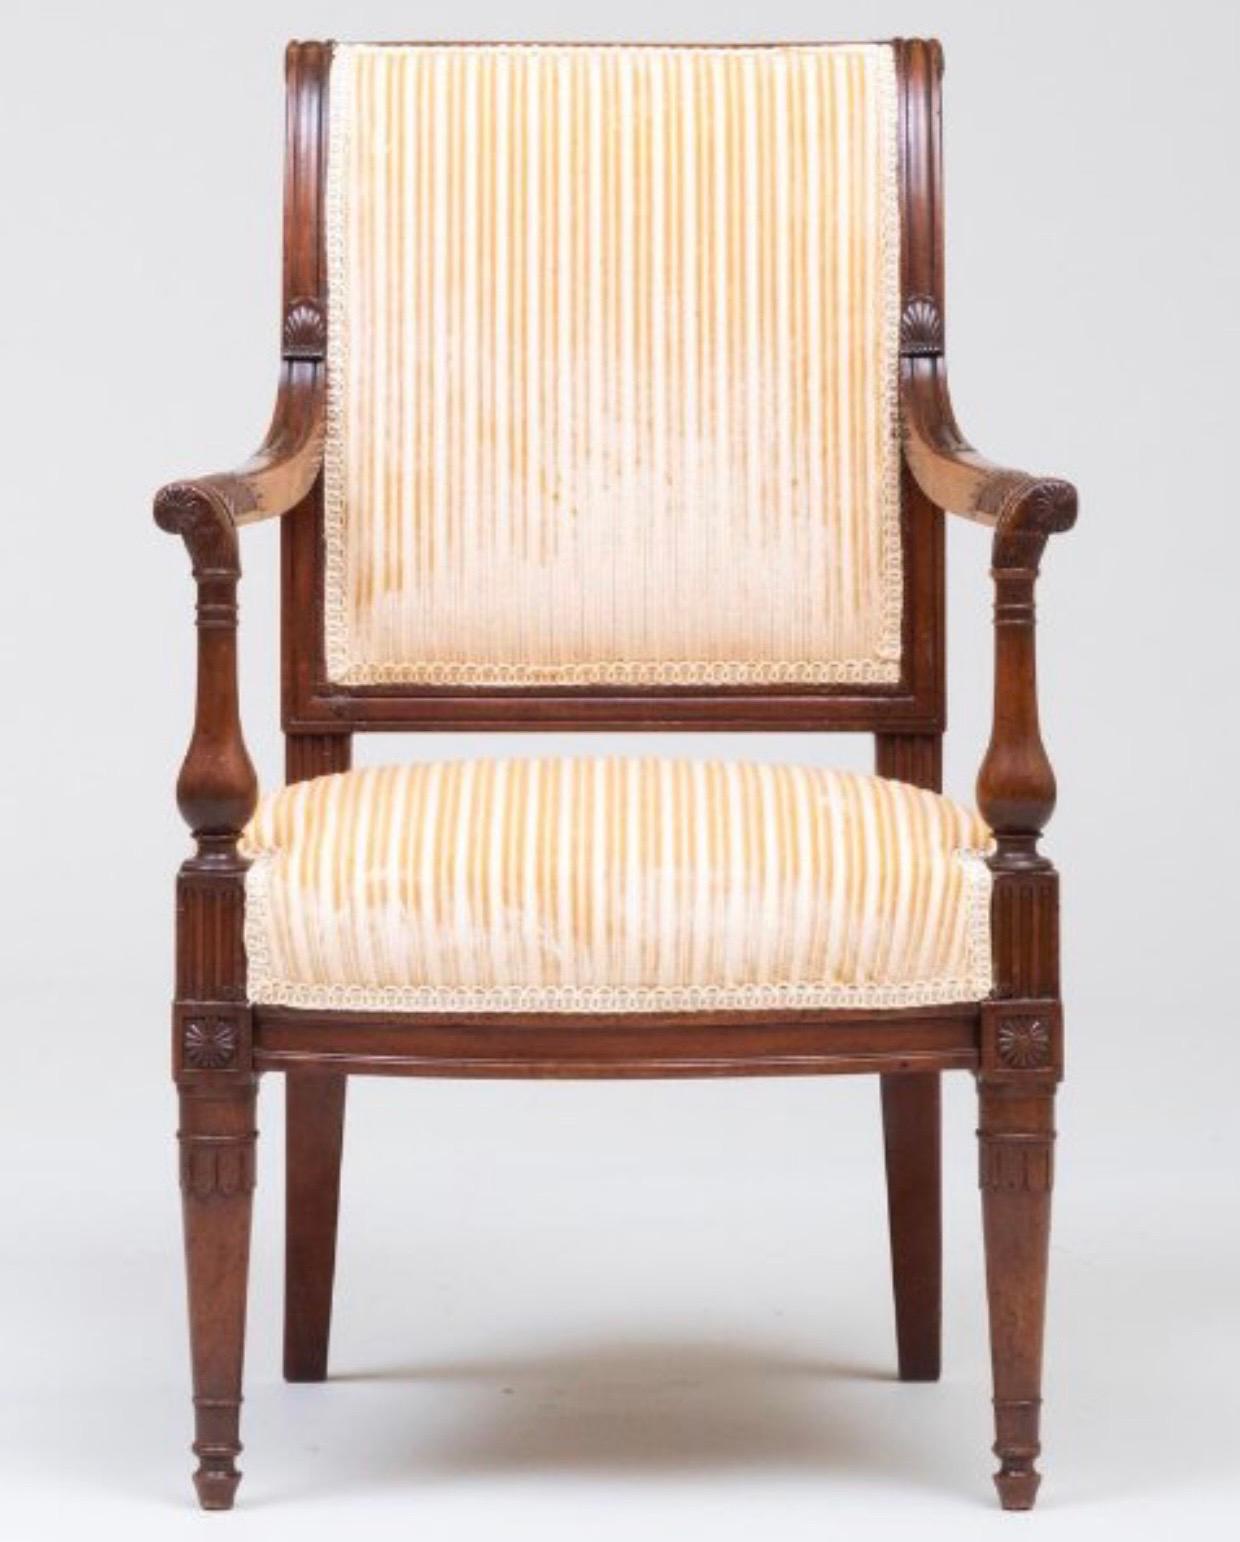 The diminutive armchair with wear consistent with age and use.
 